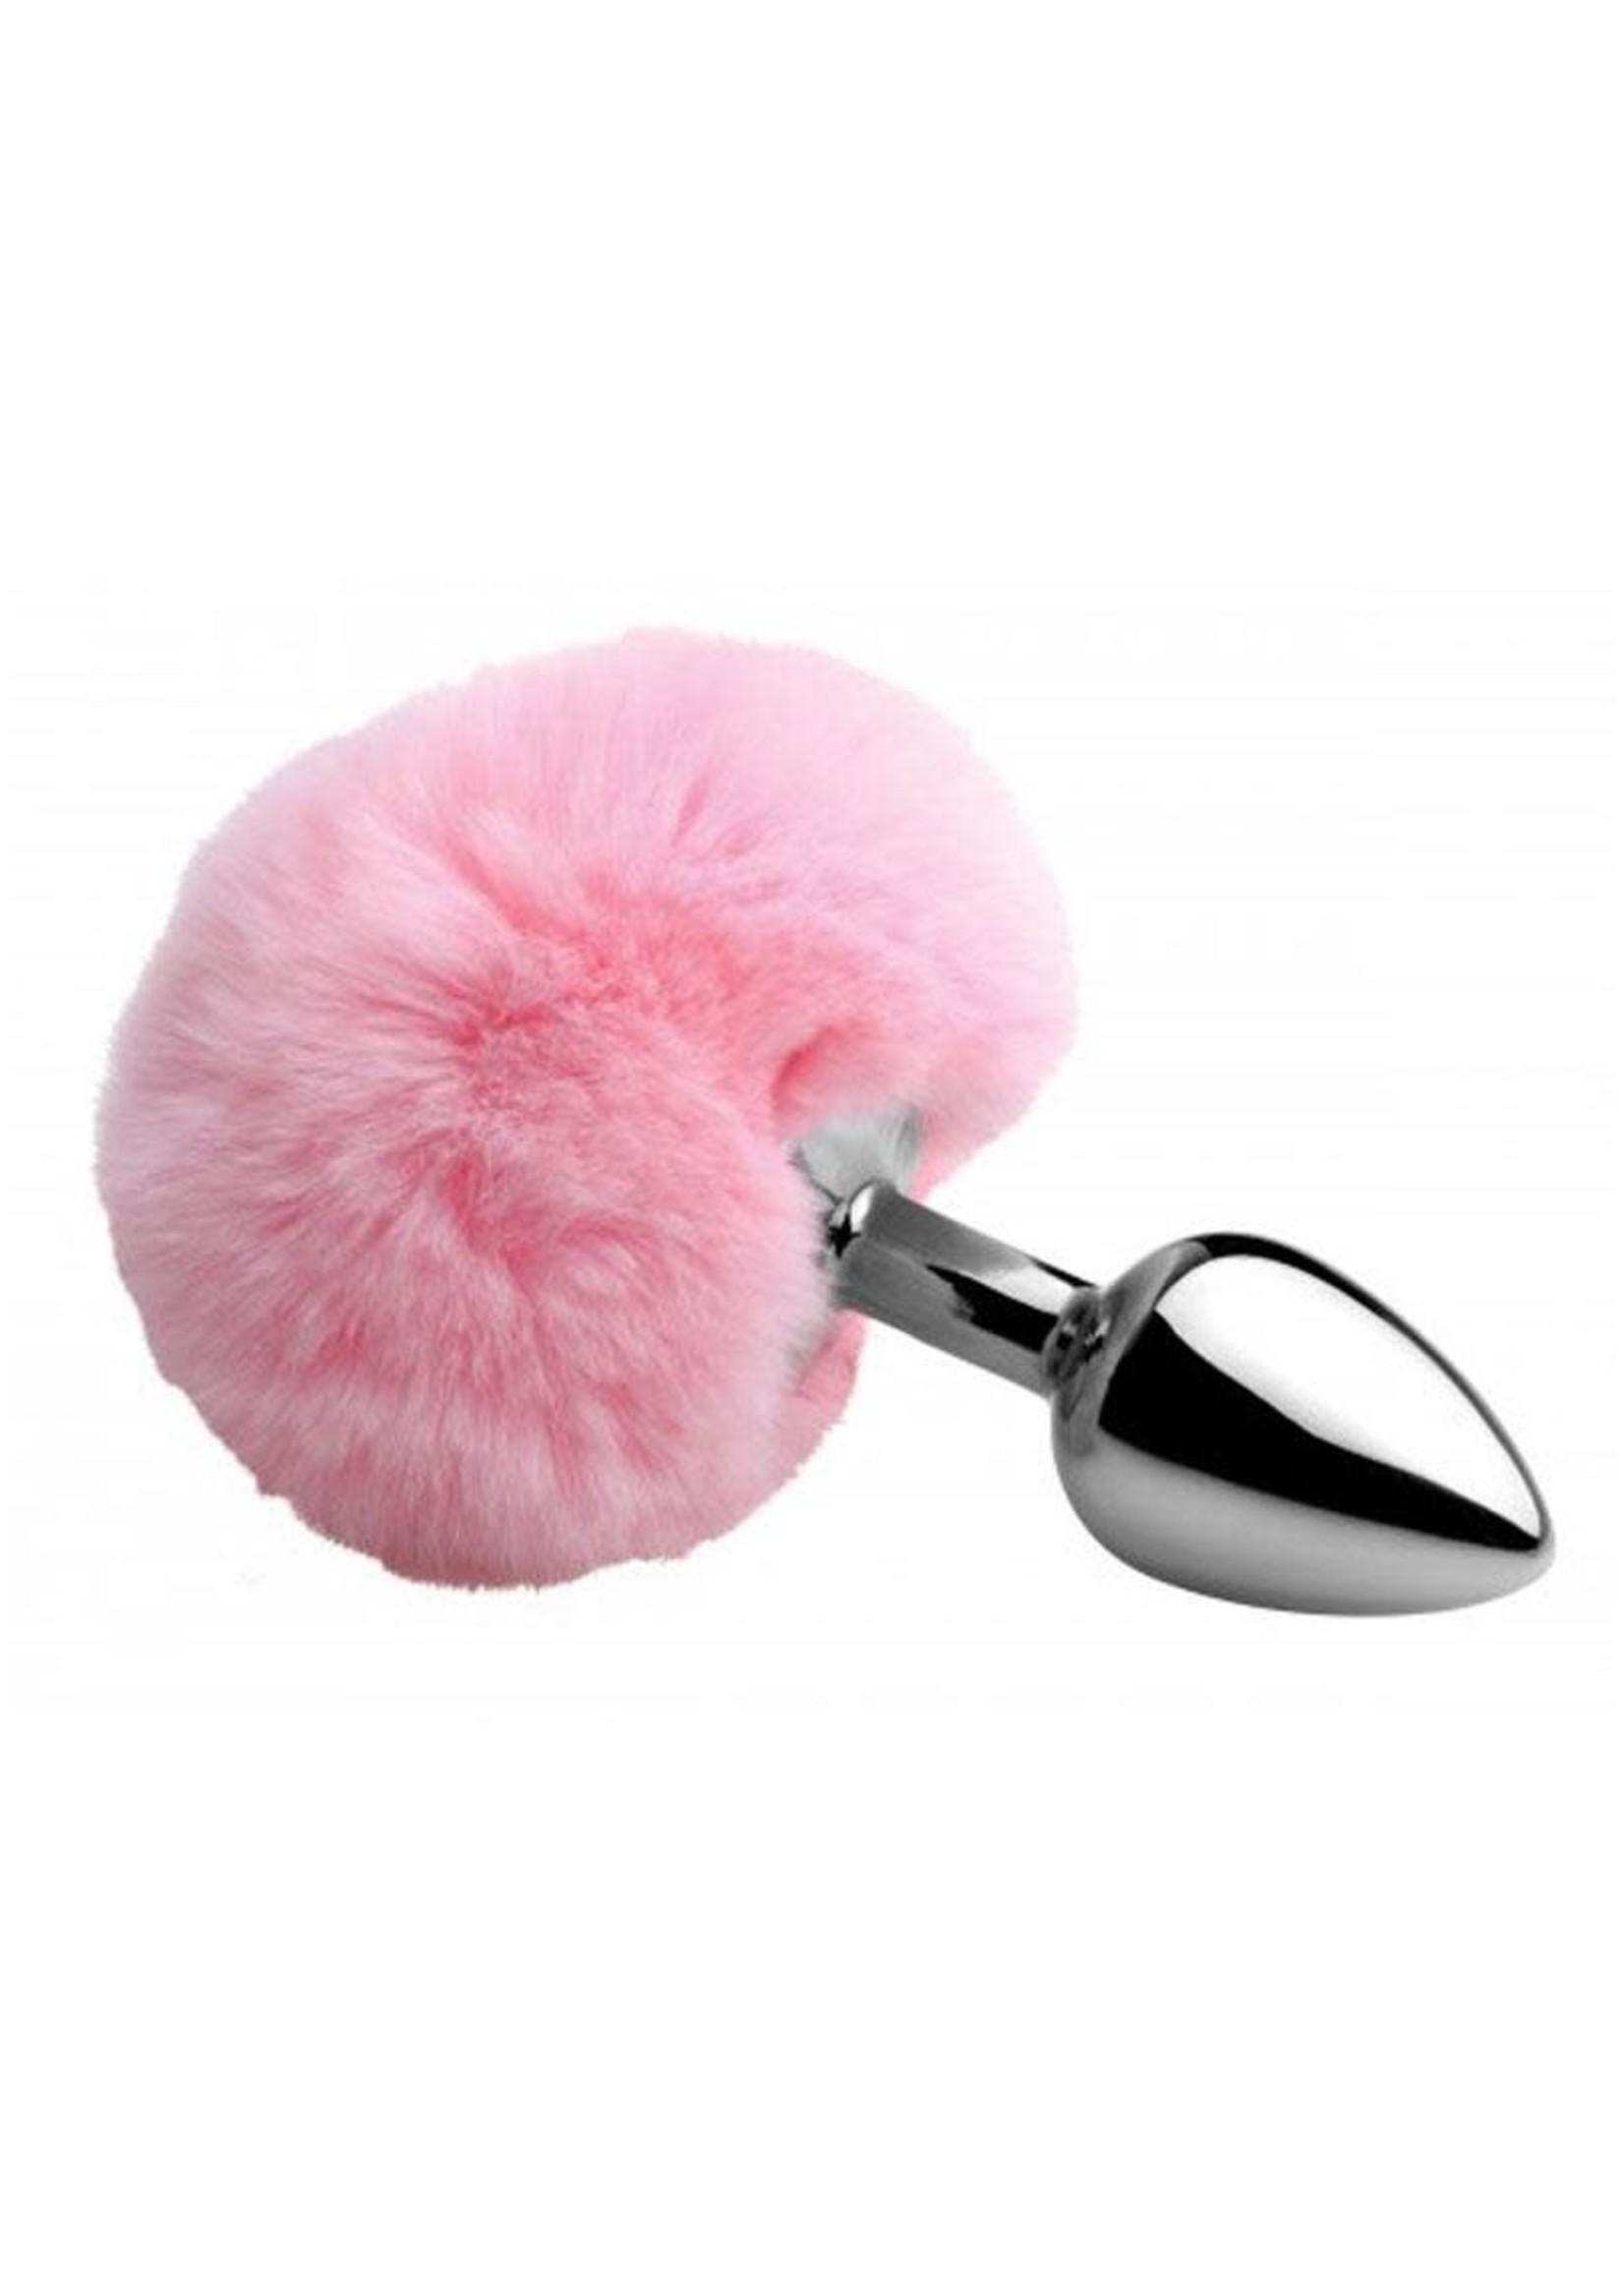 XR Brands Tailz Fluffy Bunny Tail Anal Plug - Pink And Silver